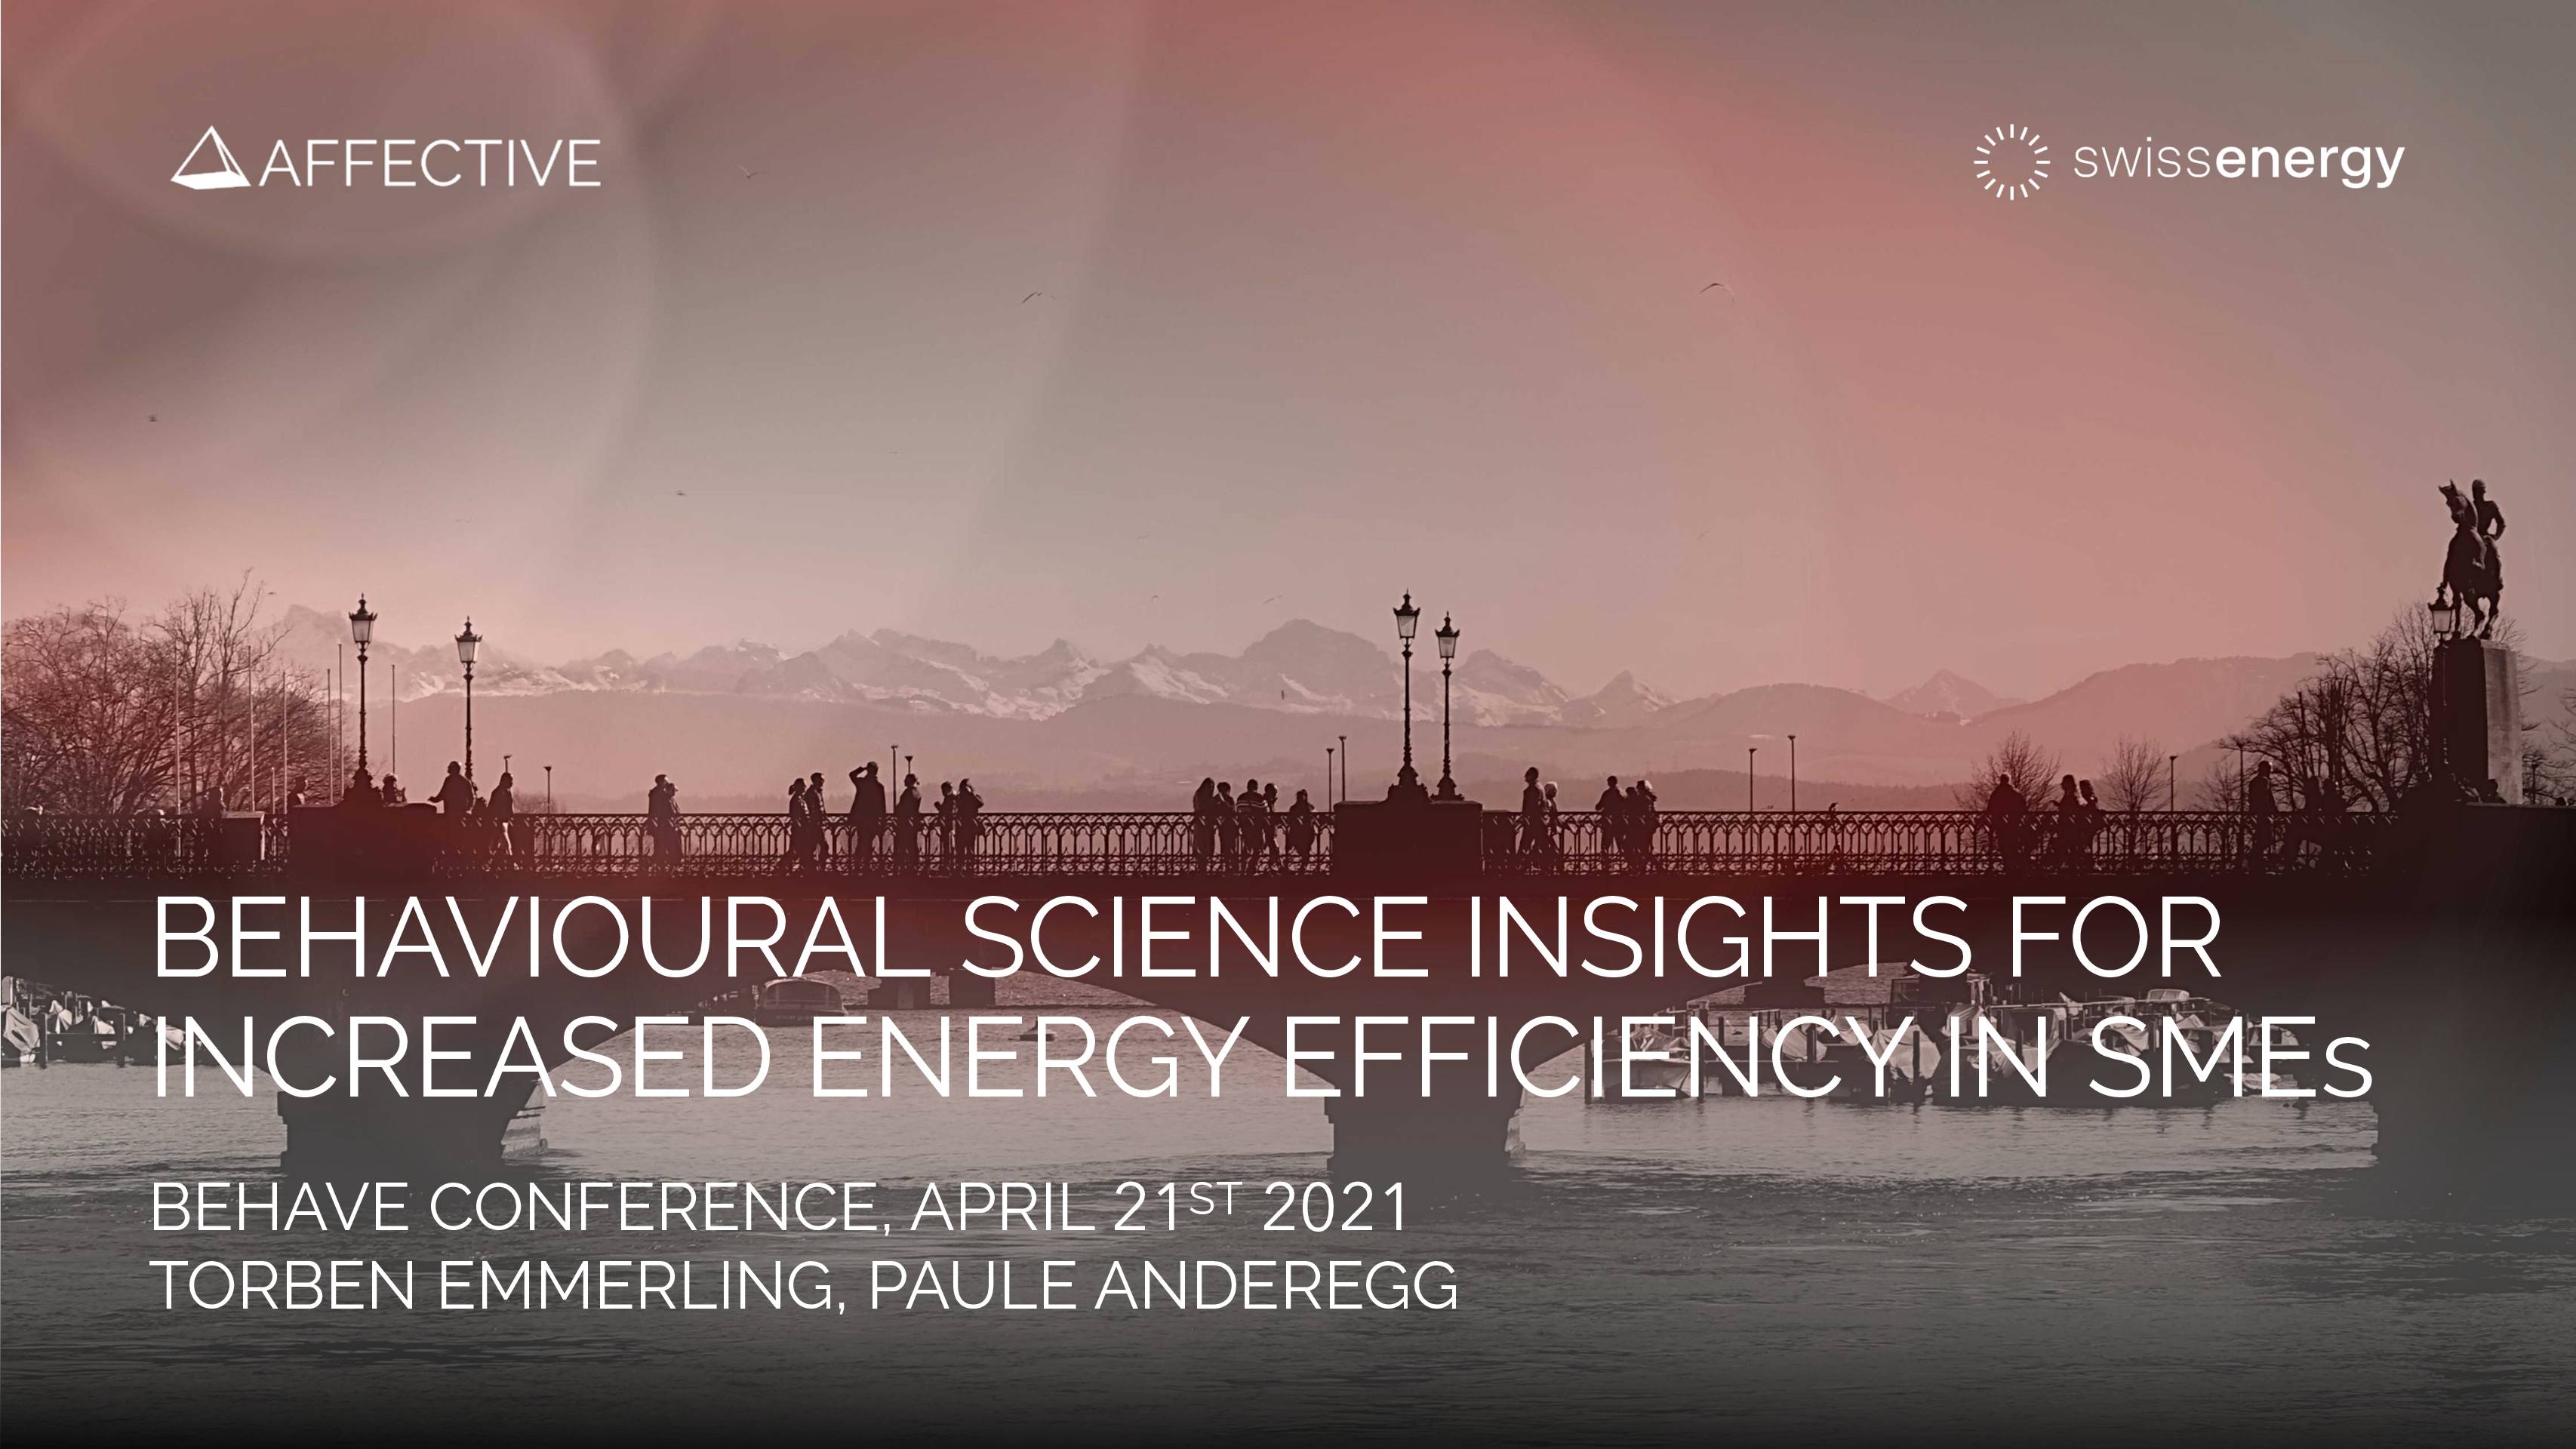 Behavioural science informed catalogue for increasing energy efficiency in SMEs